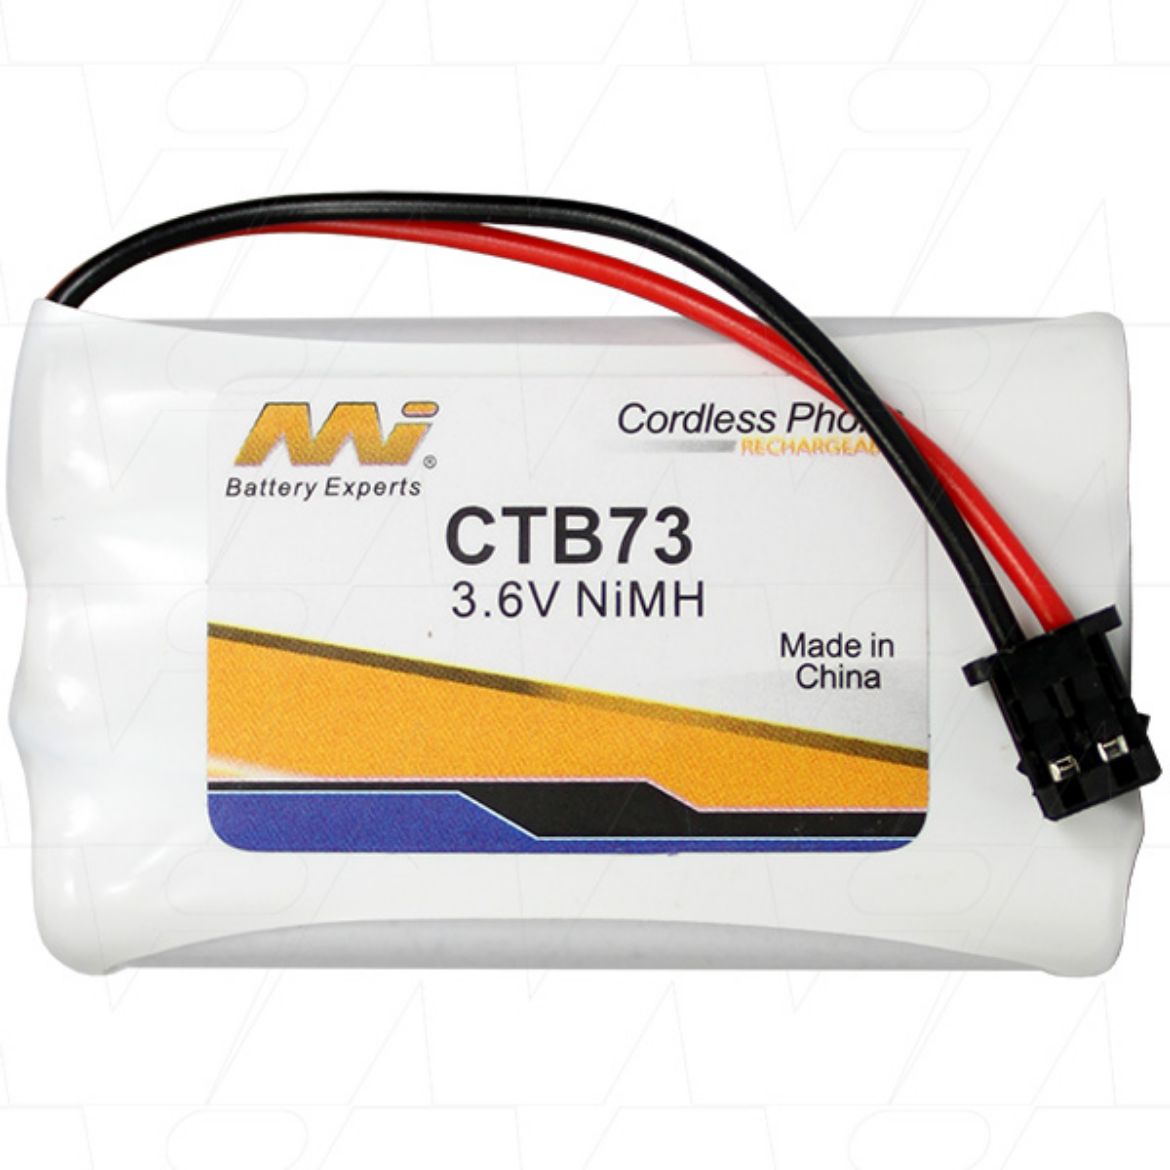 Picture of CTB73 CORDLESS PHONE 3.6V NIMH BATTERY